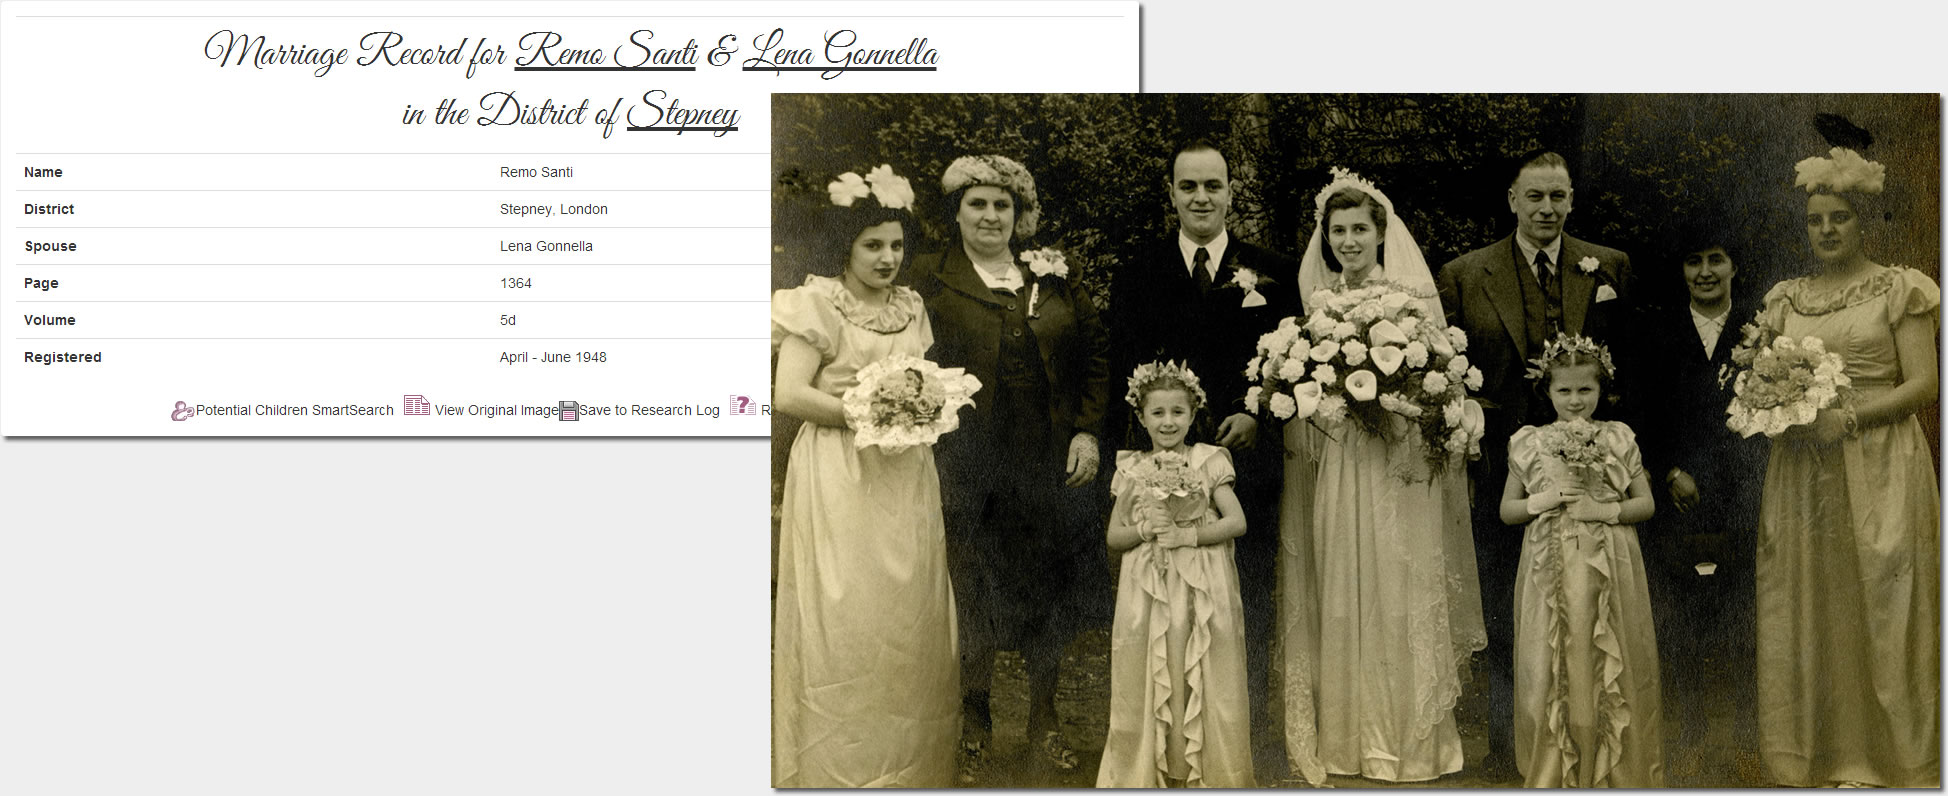 Remo and Lena's marriage record at TheGenealogist